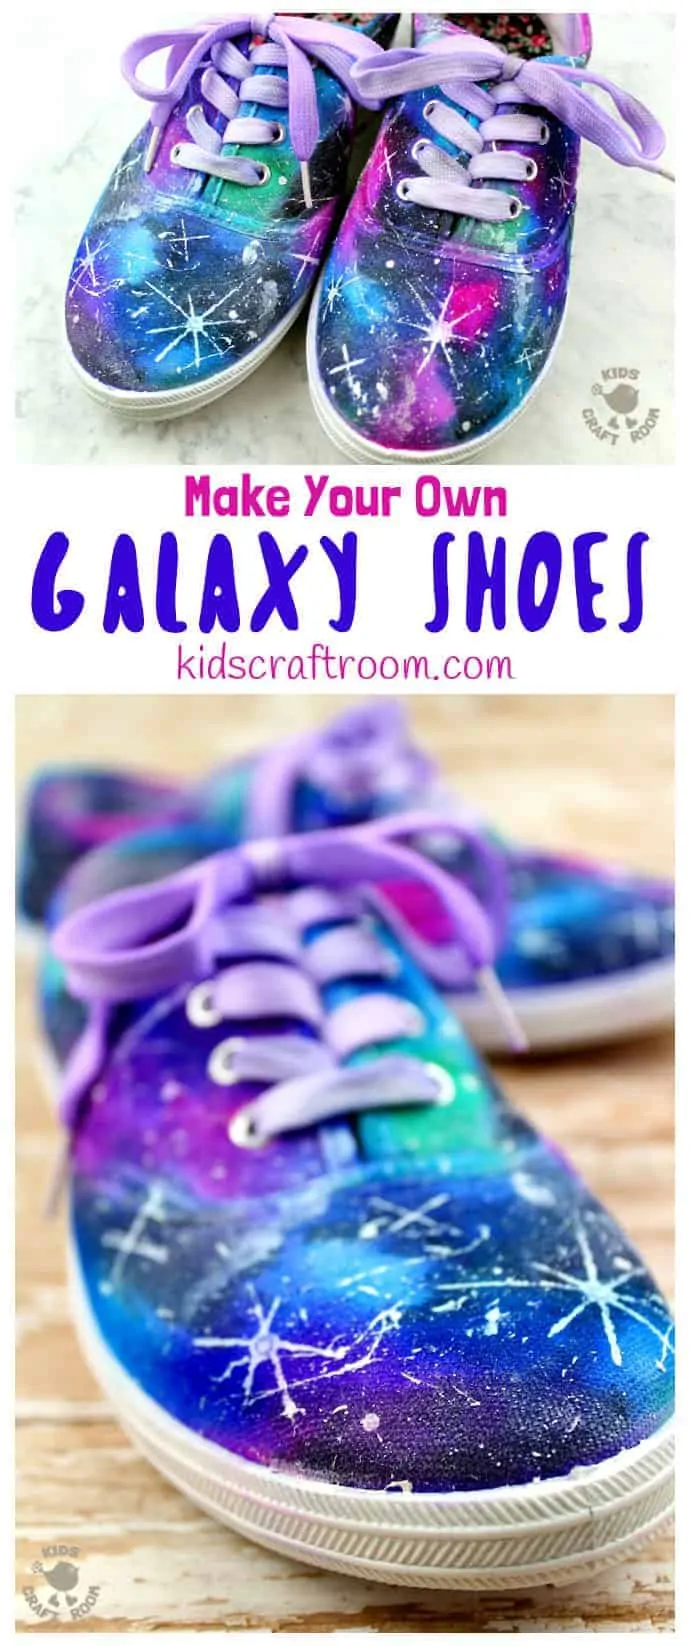 See how to make DIY Galaxy Shoes. They're totally cosmic! Such a fun space craft for kids and grown-ups. This is an easy Sharpie craft you'll be over the moon with! #kidscraftroom #kidscrafts #Sharpiecrafts #space #shoes #teencrafts #tweencrafts #kidsactivities